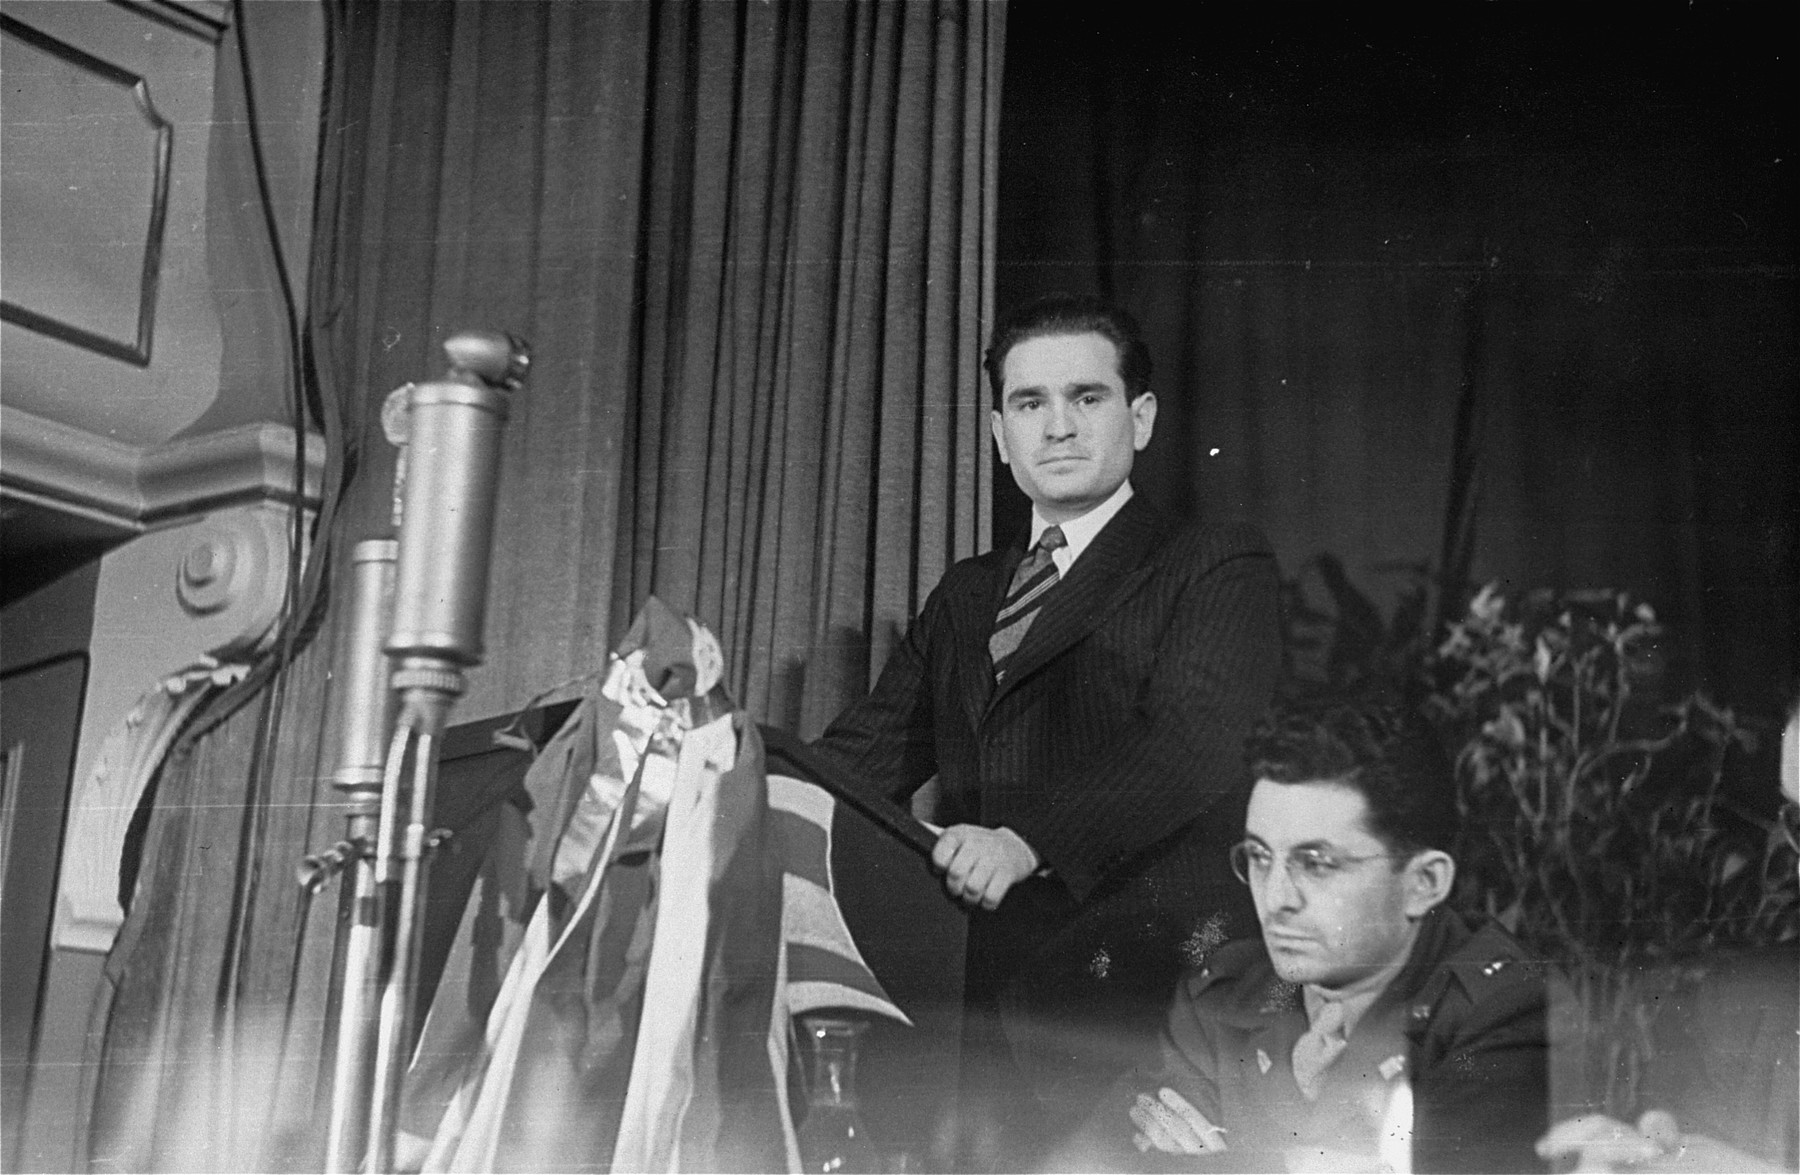 Leon Retter addresses a conference sponsored by the Central Committee of Liberated Jews in the U.S. Zone of Germany.  

Seated next to him is U.S. Army chaplain Abraham Klausner.